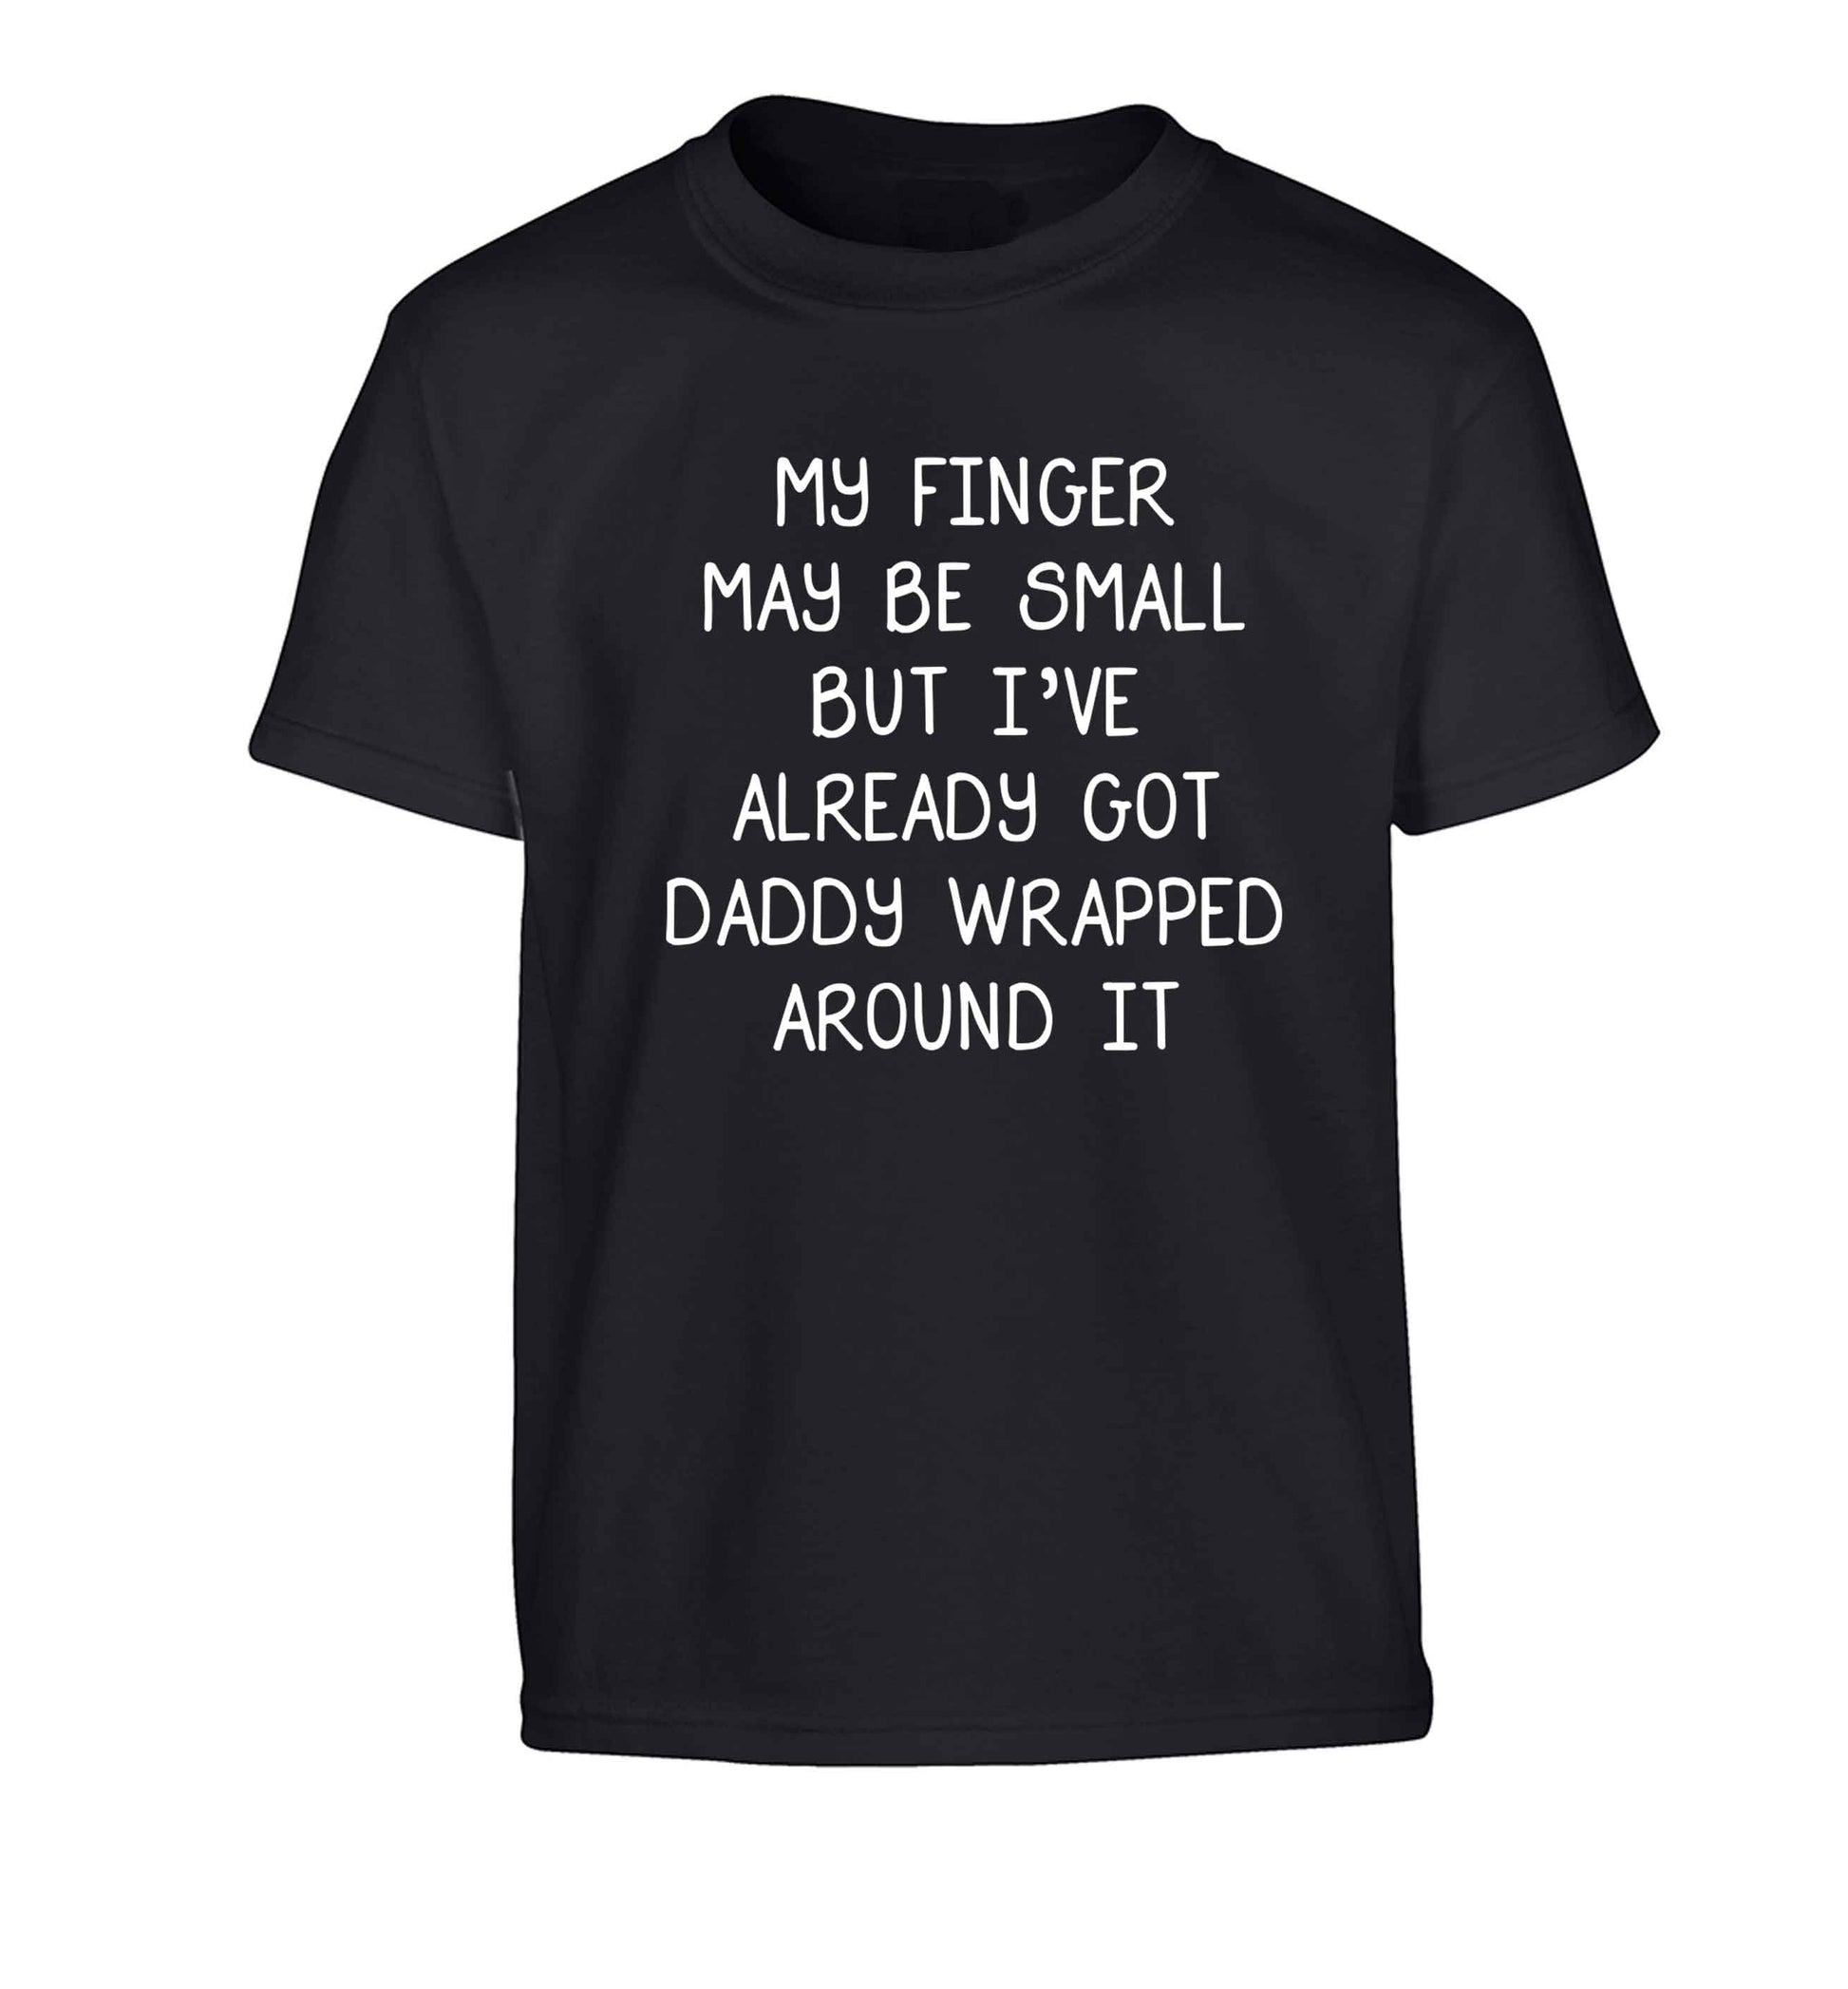 My finger may be small but I've already got daddy wrapped around it Children's black Tshirt 12-13 Years